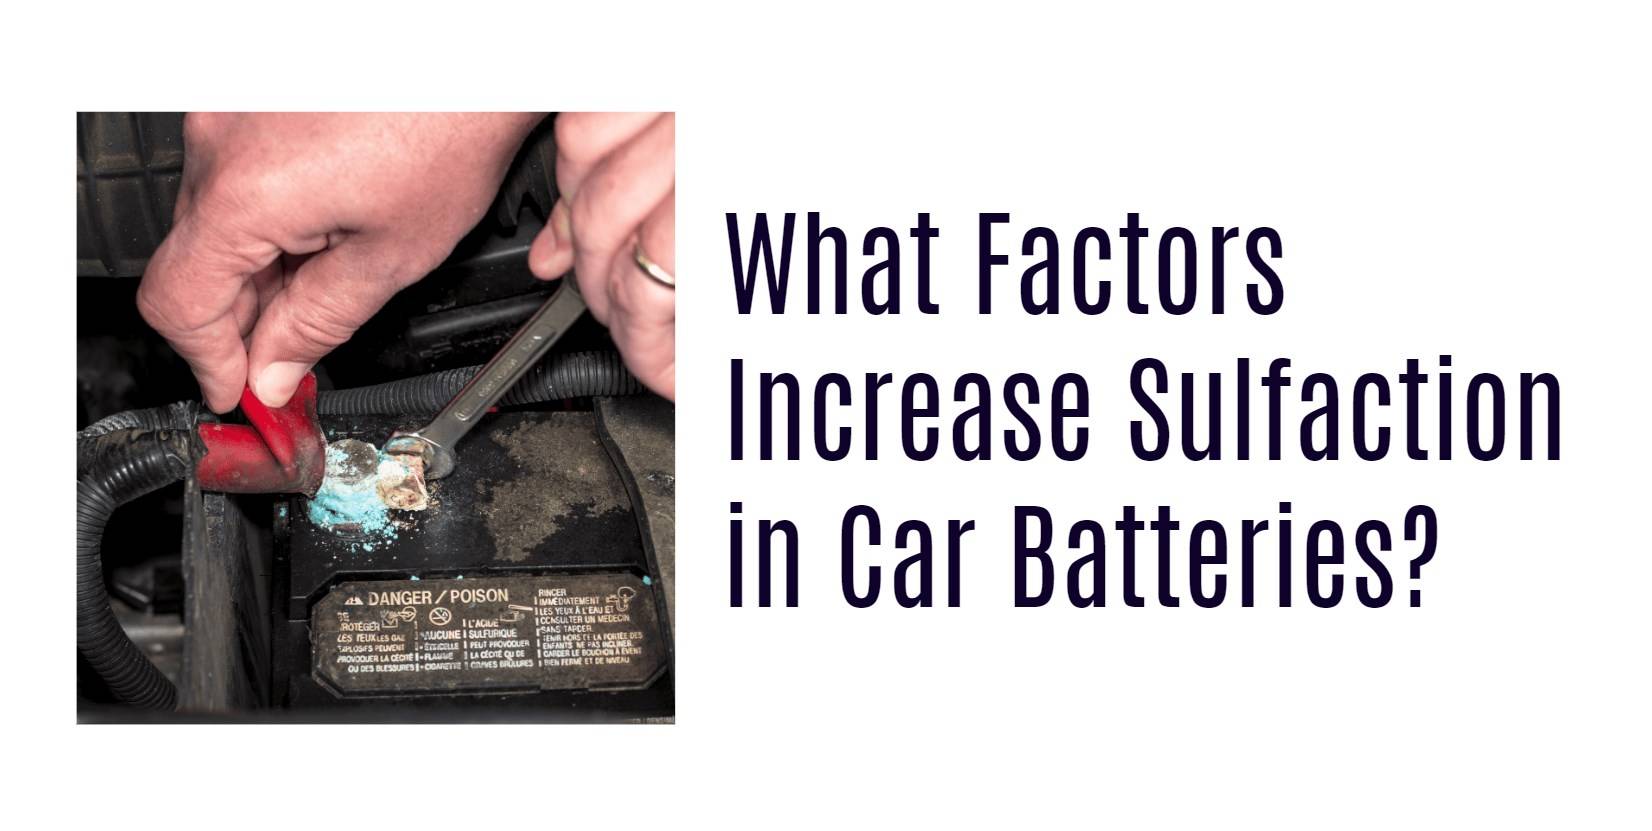 What Factors Increase Sulfaction in Car Batteries?